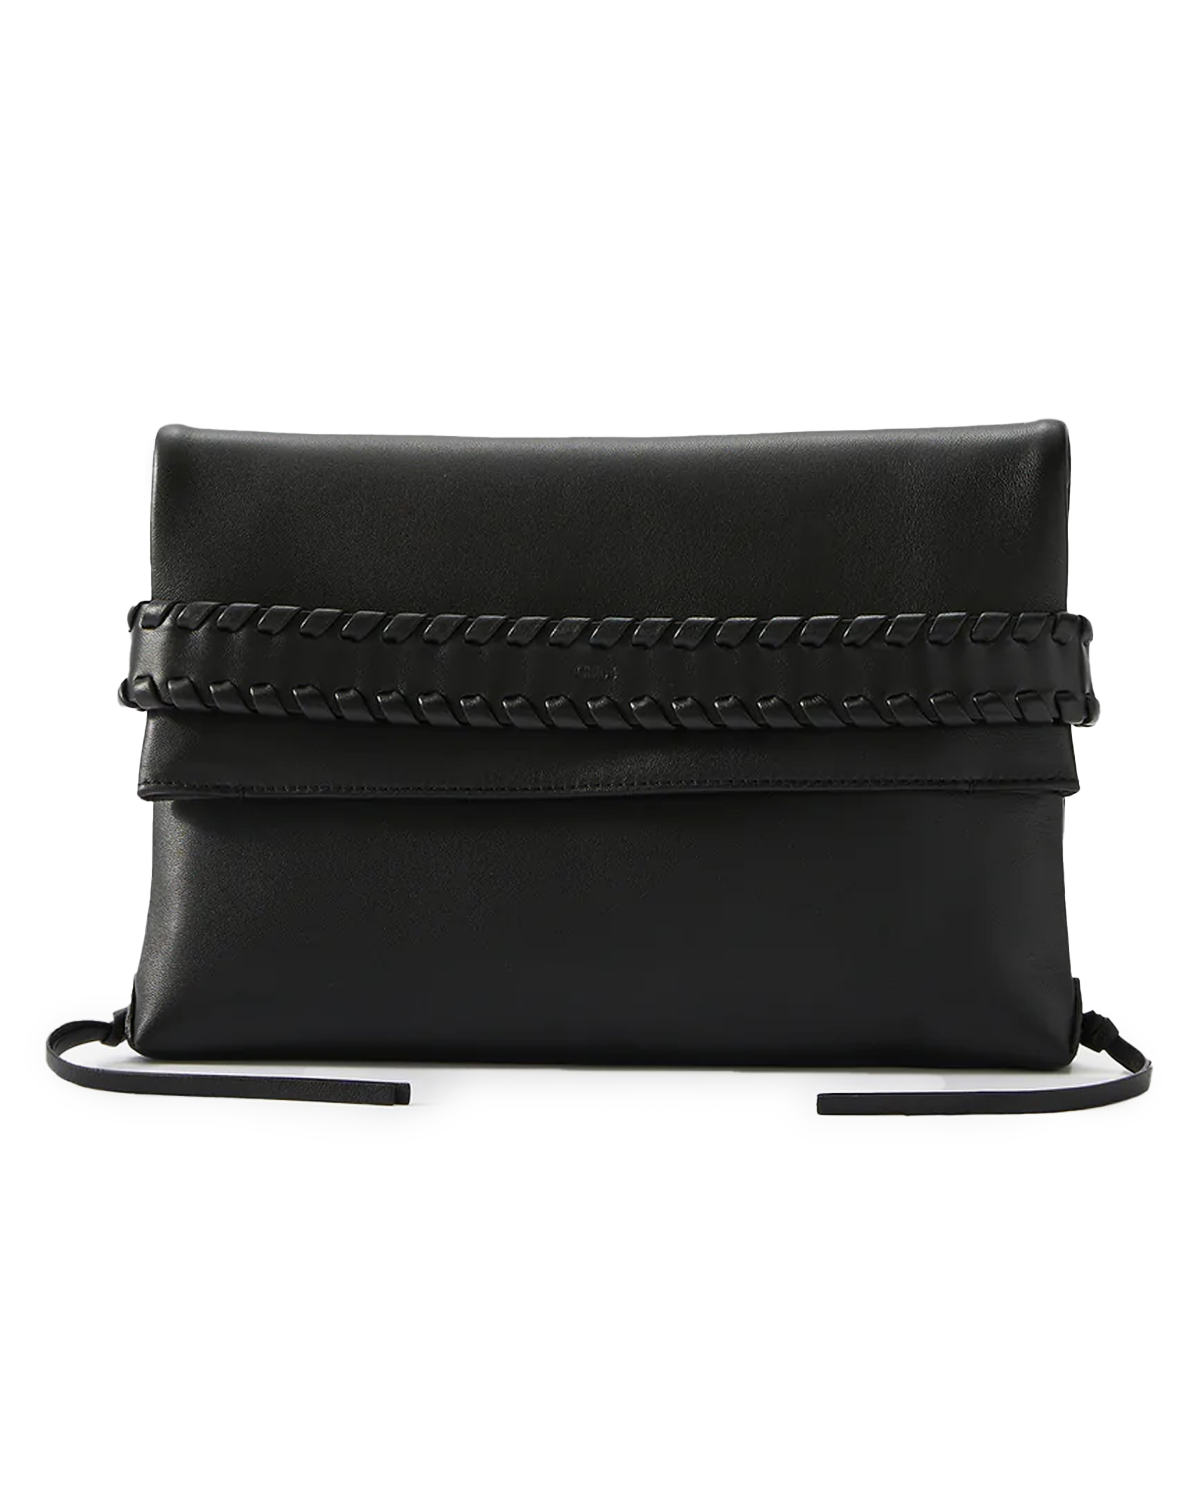 Mony Fold Over Clutch in Black